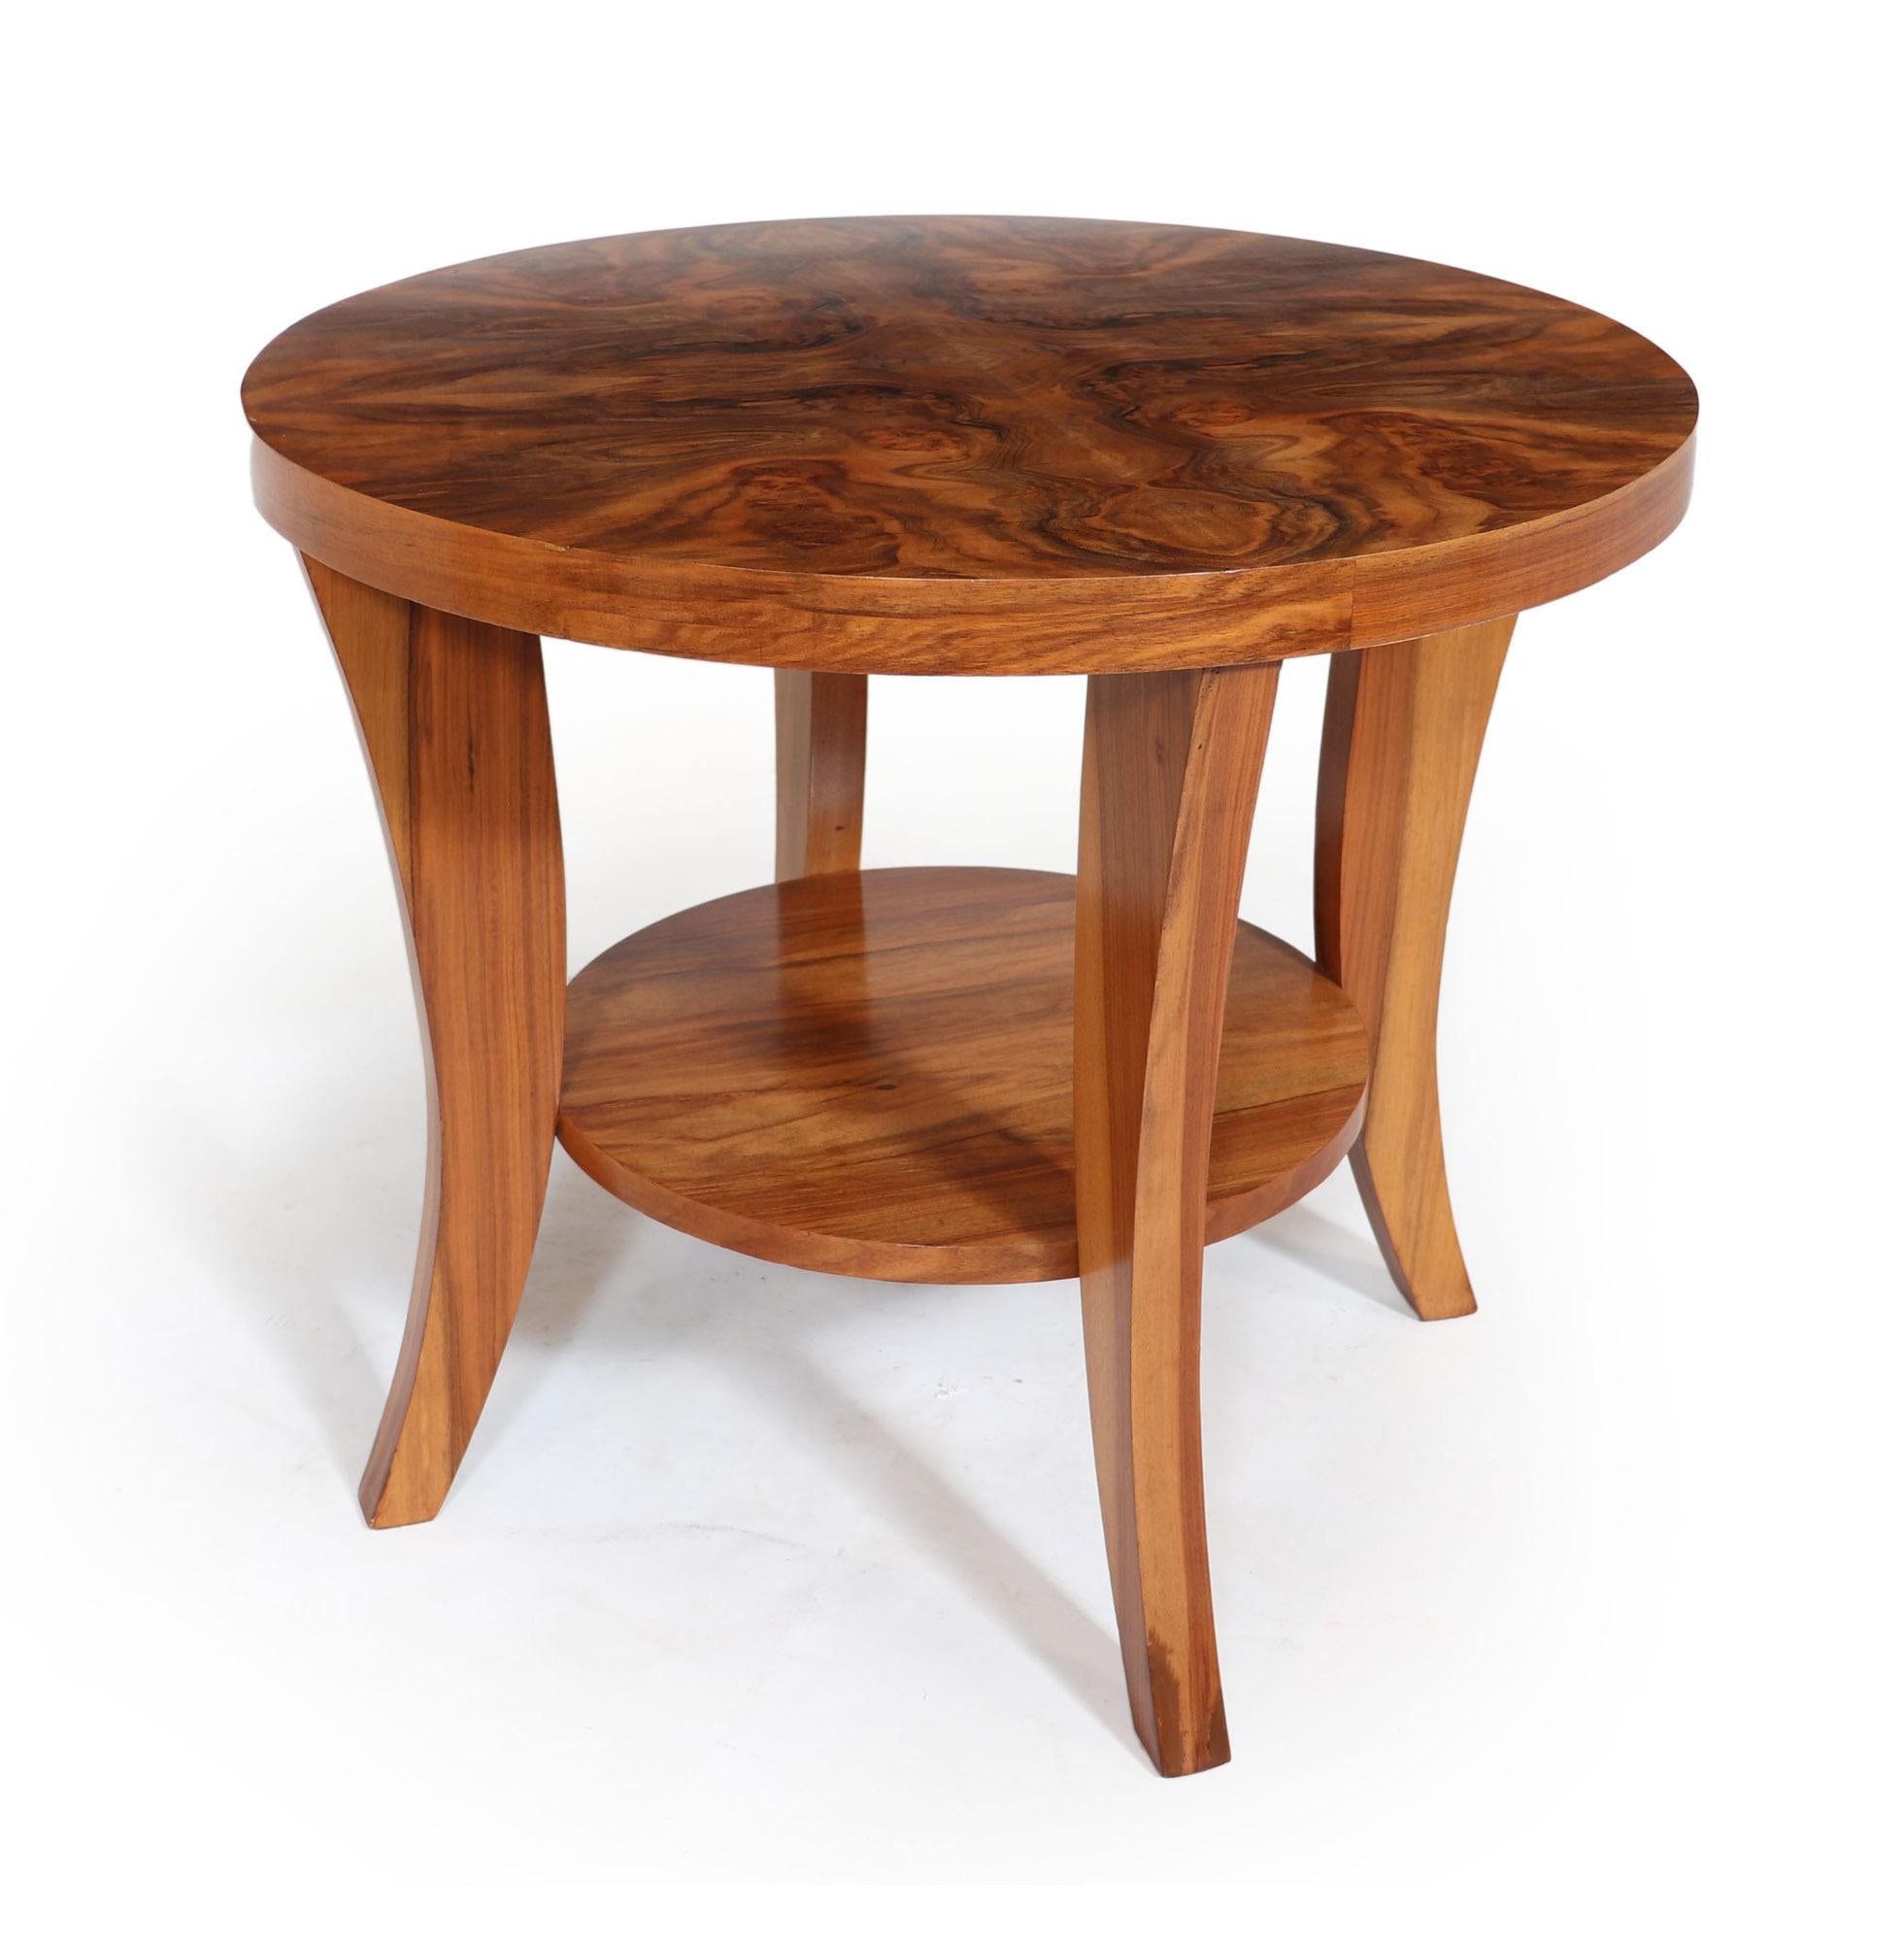 Art Deco walnut coffee table.
A circular figured walnut center coffee table, produced in France in the 1930’s, the table has four saber legs with center lower tier shelf, the table has been full restored and polished and is in excellent condition